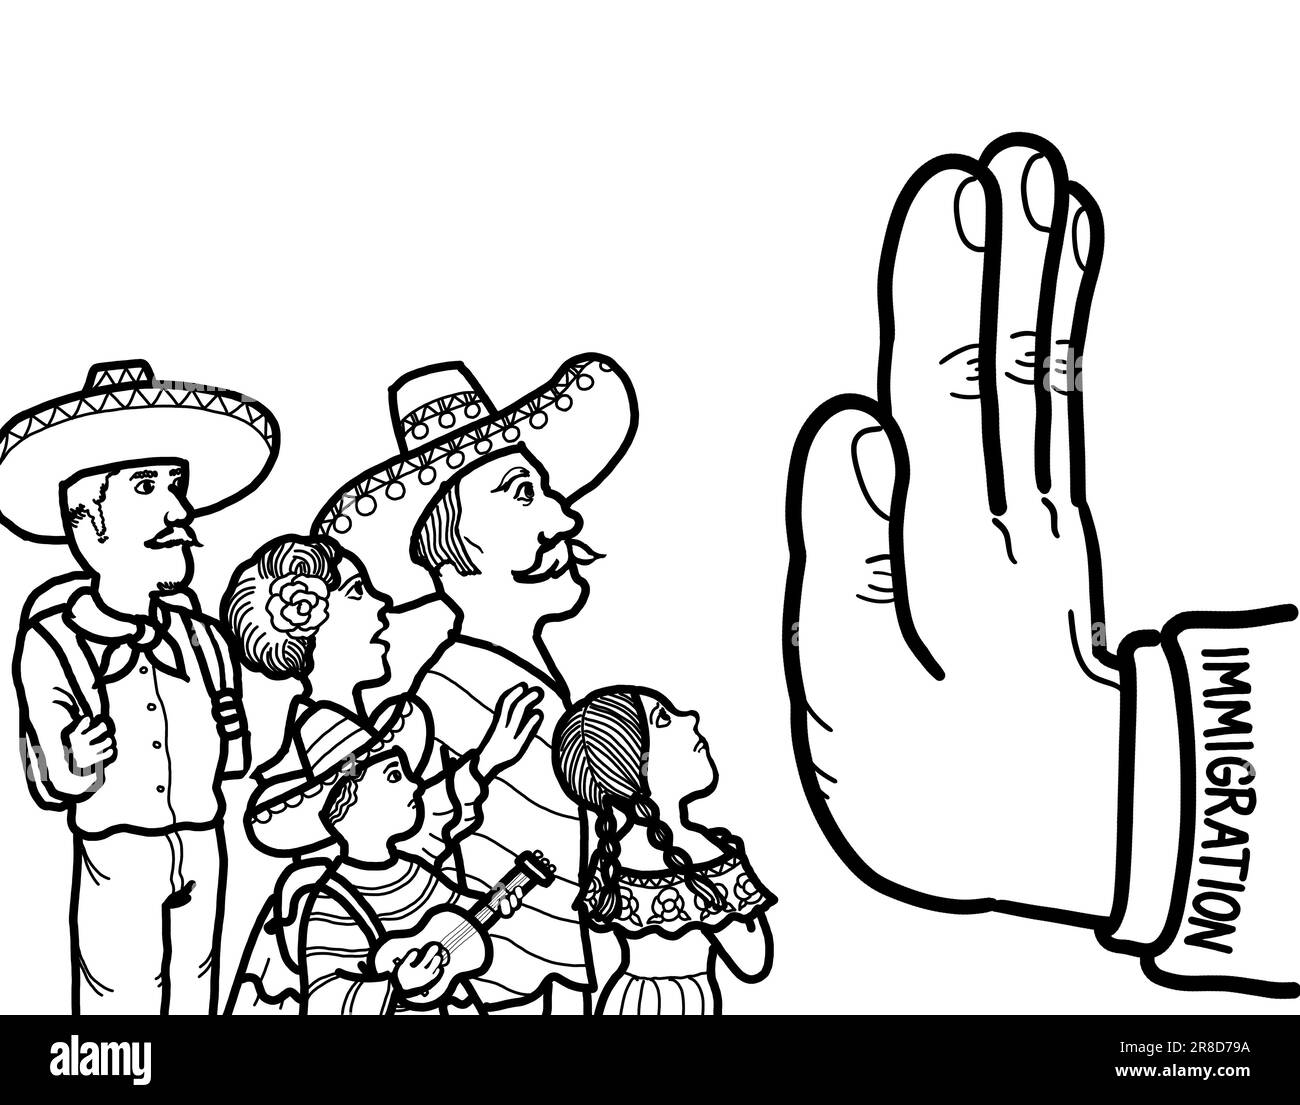 A hand symbolizing the prevention of Mexican illegal immigration, refugees and asylum seekers from entering the country. Stock Photo